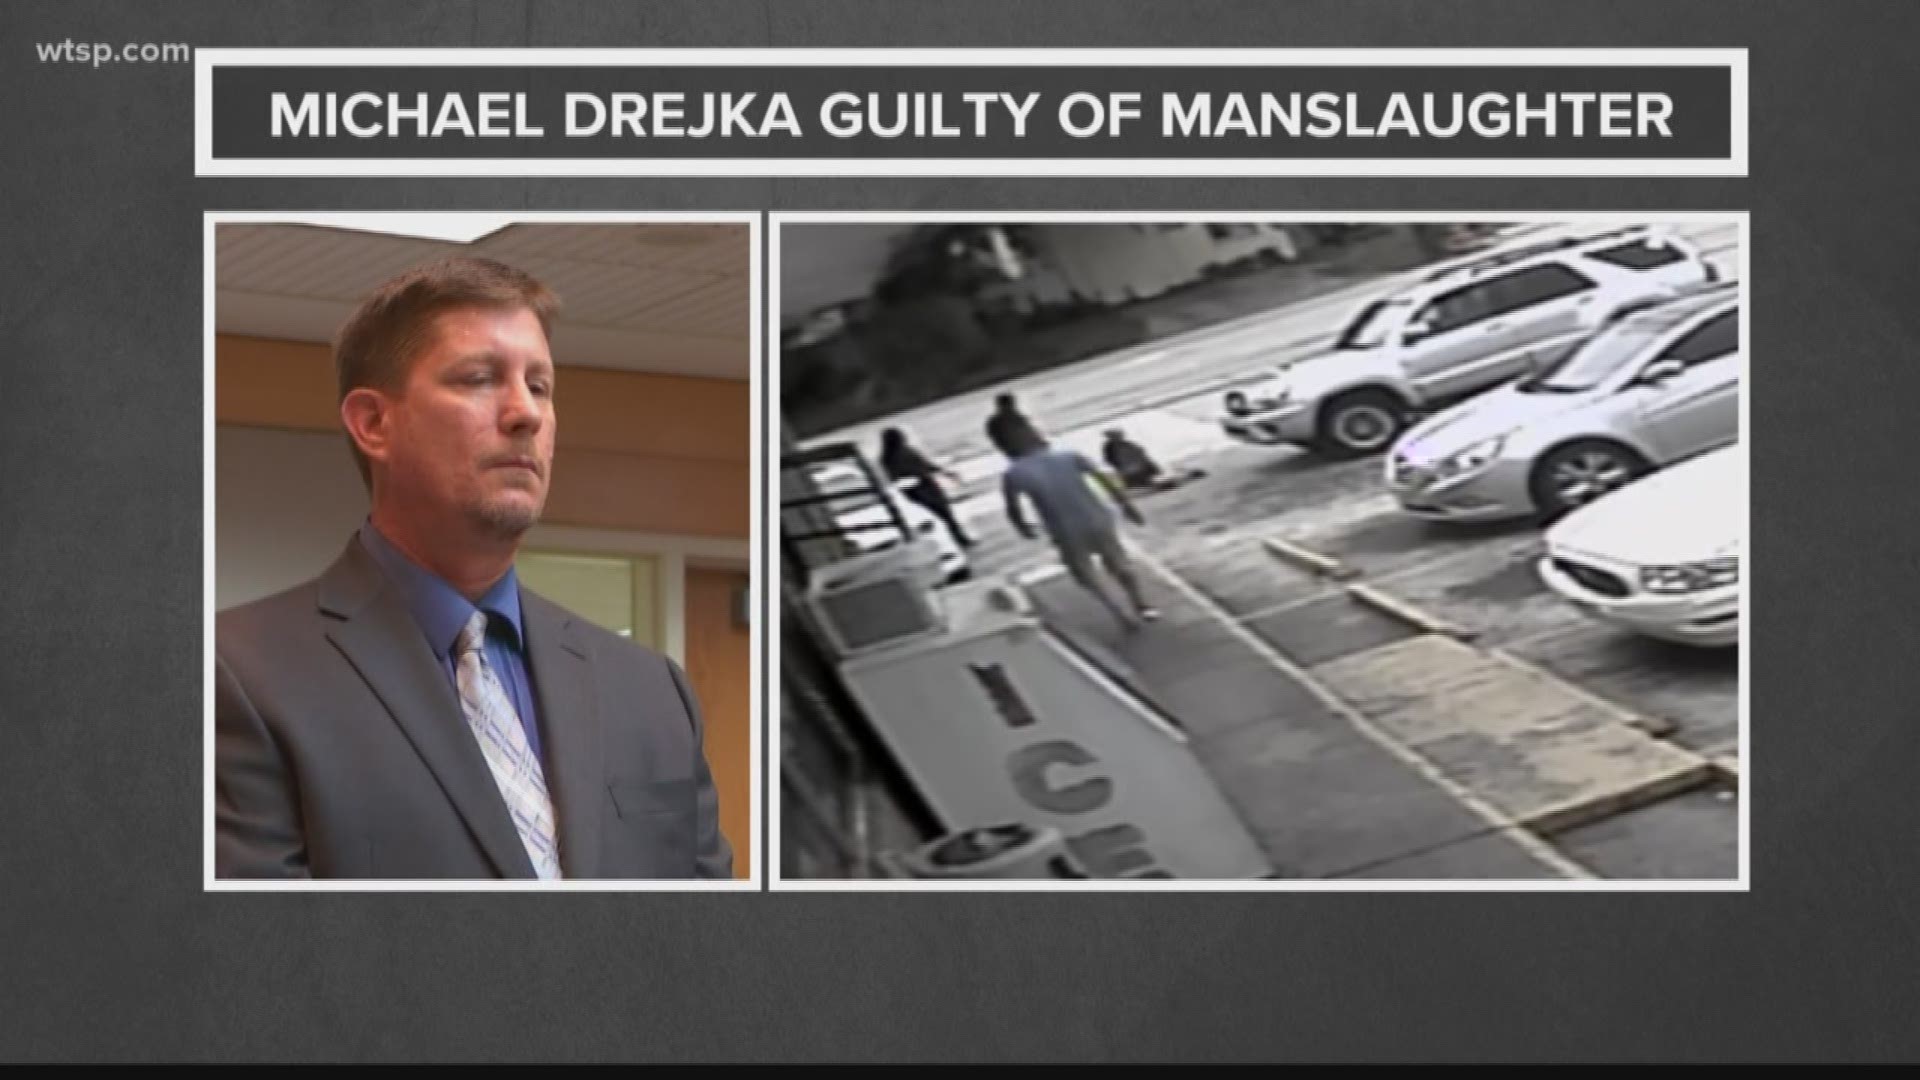 A jury has found Michael Drejka guilty of manslaughter in the shooting death of Markeis McGlockton.

McGlockton was shot and killed by Drejka during a July 2018 dispute over a disabled person’s parking spot at a Clearwater convenience store. Drejka admitted to shooting McGlockton last year, but his defense team was arguing self-defense at trial.